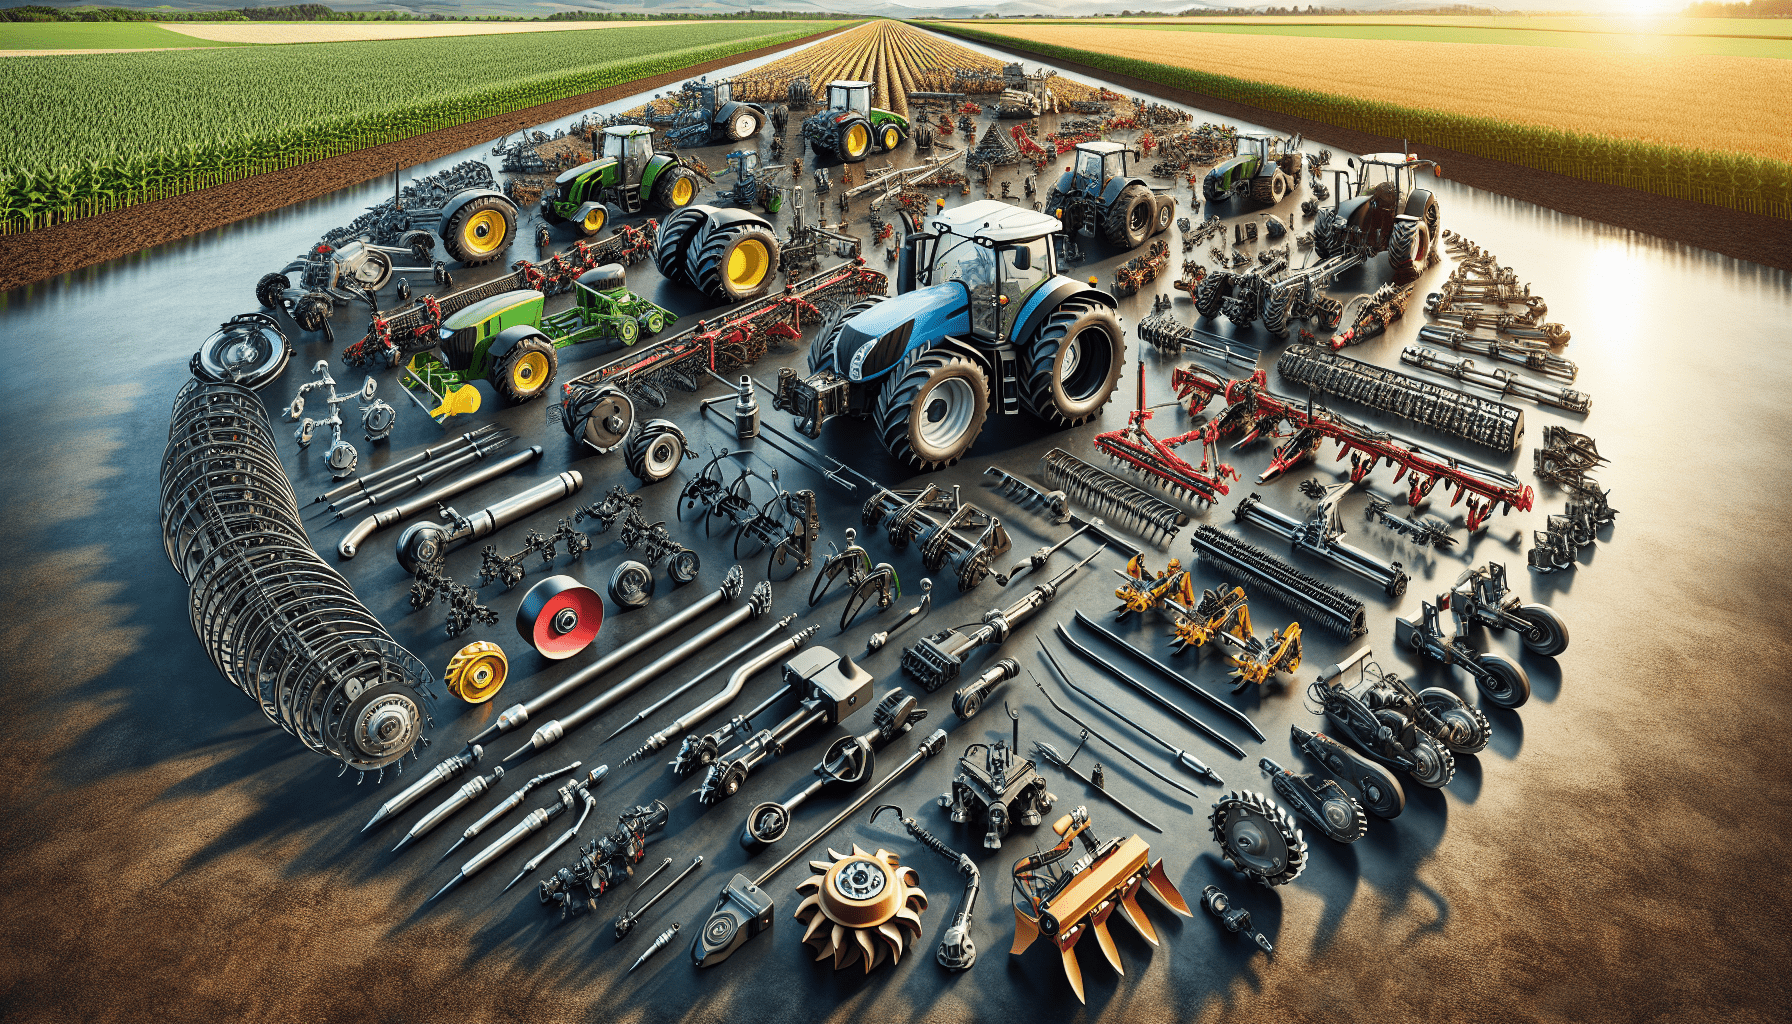 Finding The Right Tractor Accessories For Your Specific Farming Needs